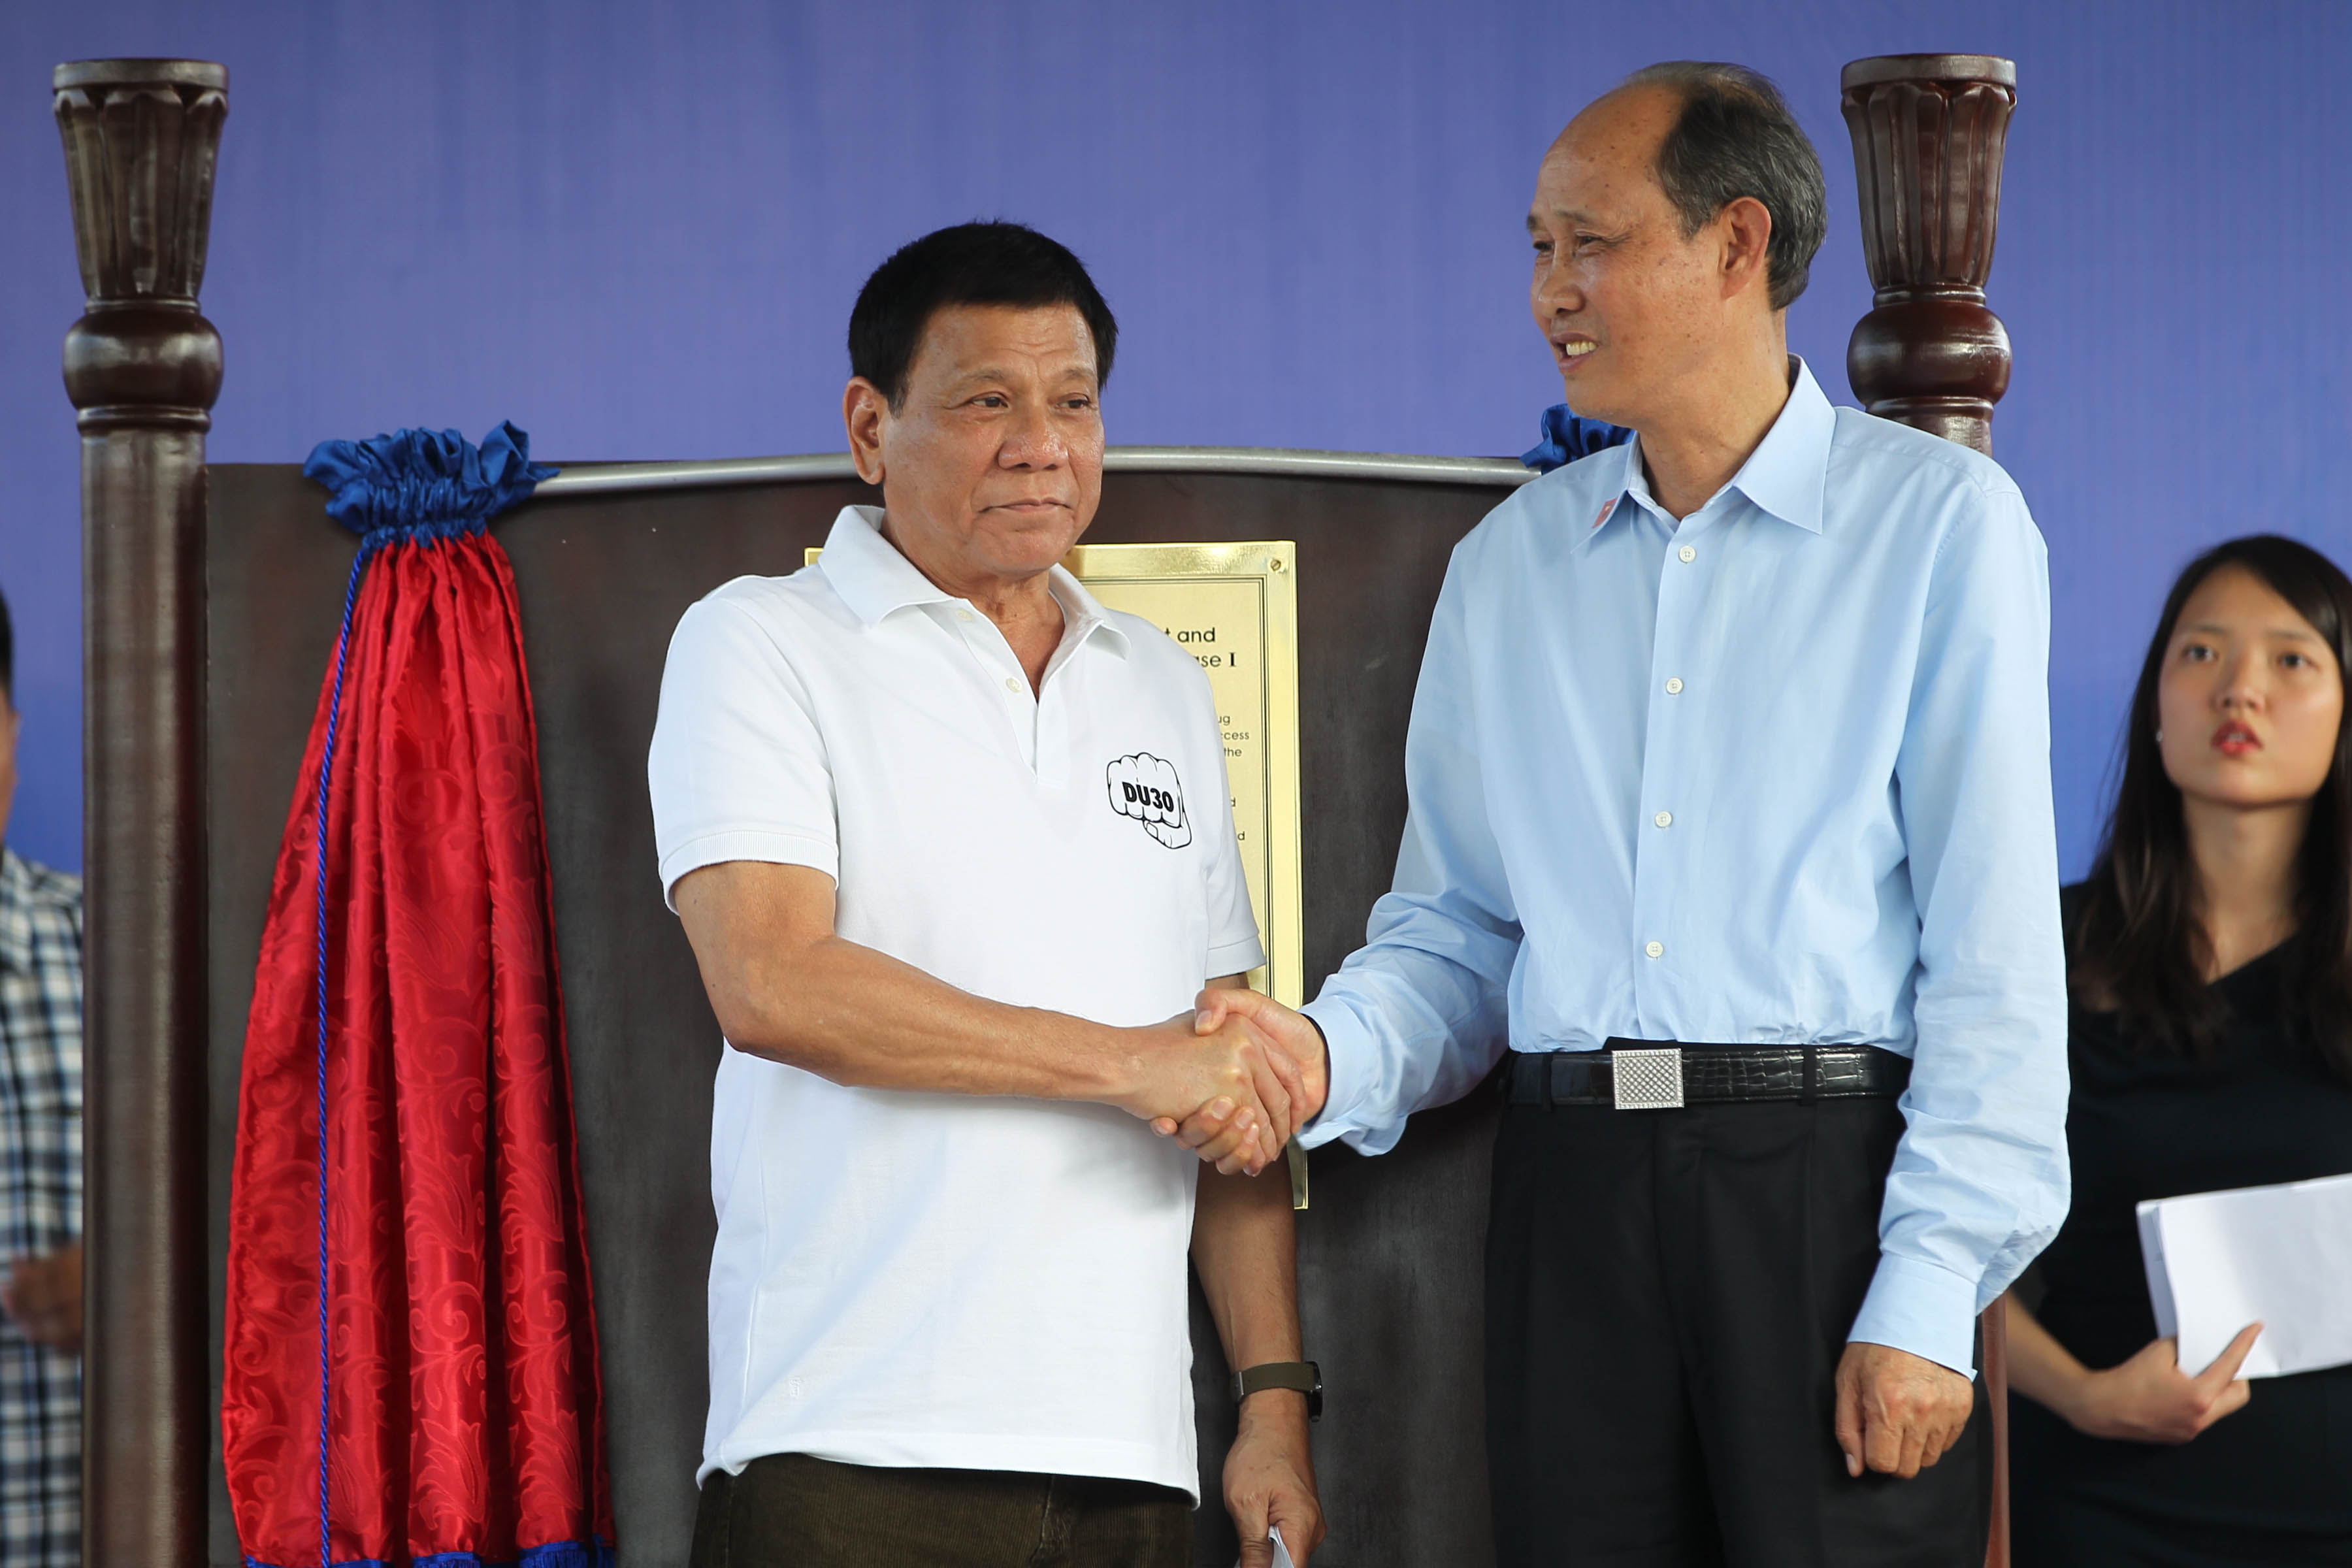 UNVEILING. President Duterte, Chinese businessman Huang Rulun (beside Duterte, on the right), and Cabinet members attend the inauguration of the mega drub rehabilitation center in Fort Magsaysay, Nueva Ecija on November 29, 2016. 